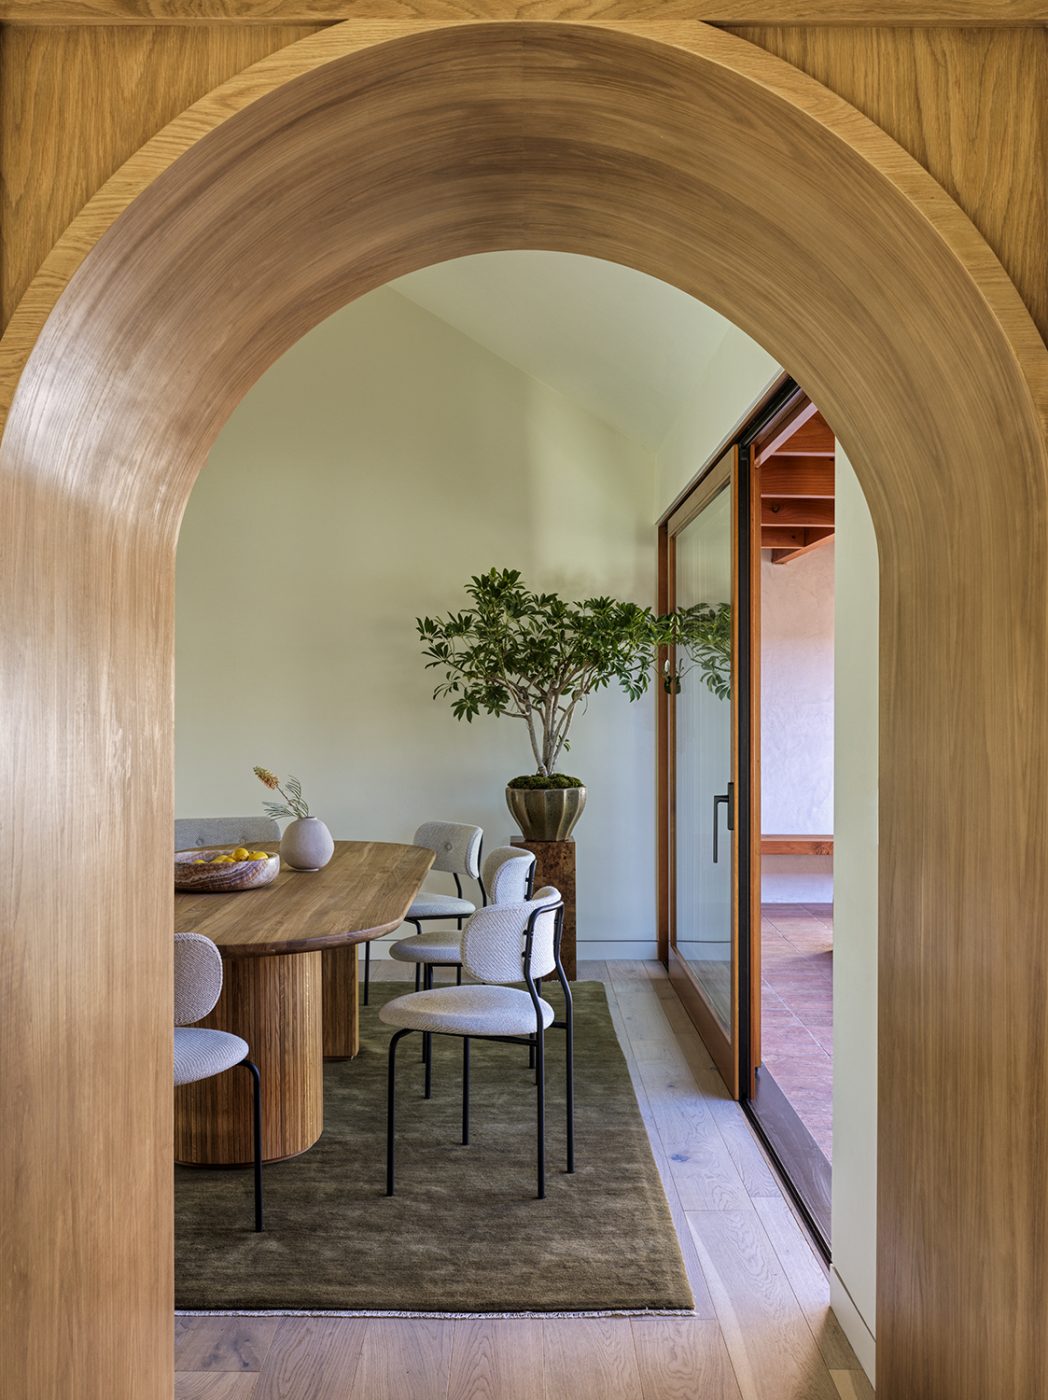 A view through an archway into the dining room of a home designed by And And And Studio in L.A.'s Beverlywood neighborhood